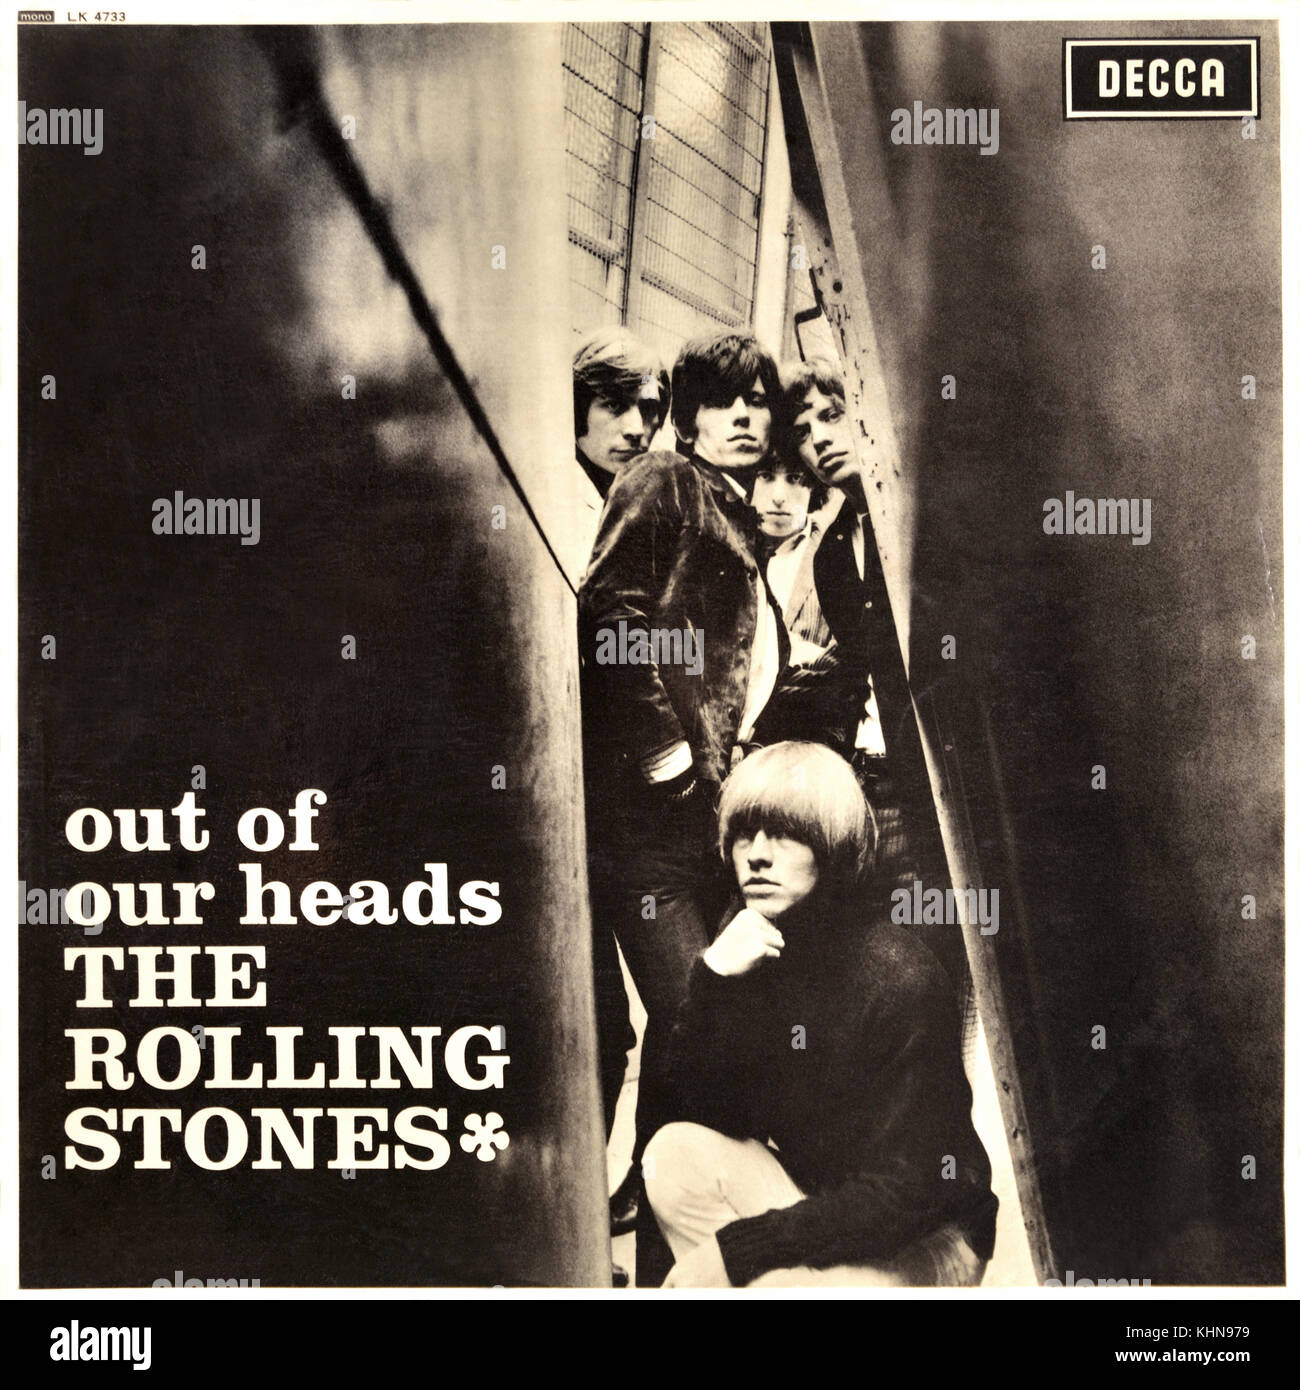 The Rolling Stones - original vinyl album cover - Out of our heads - 1965 Stock Photo